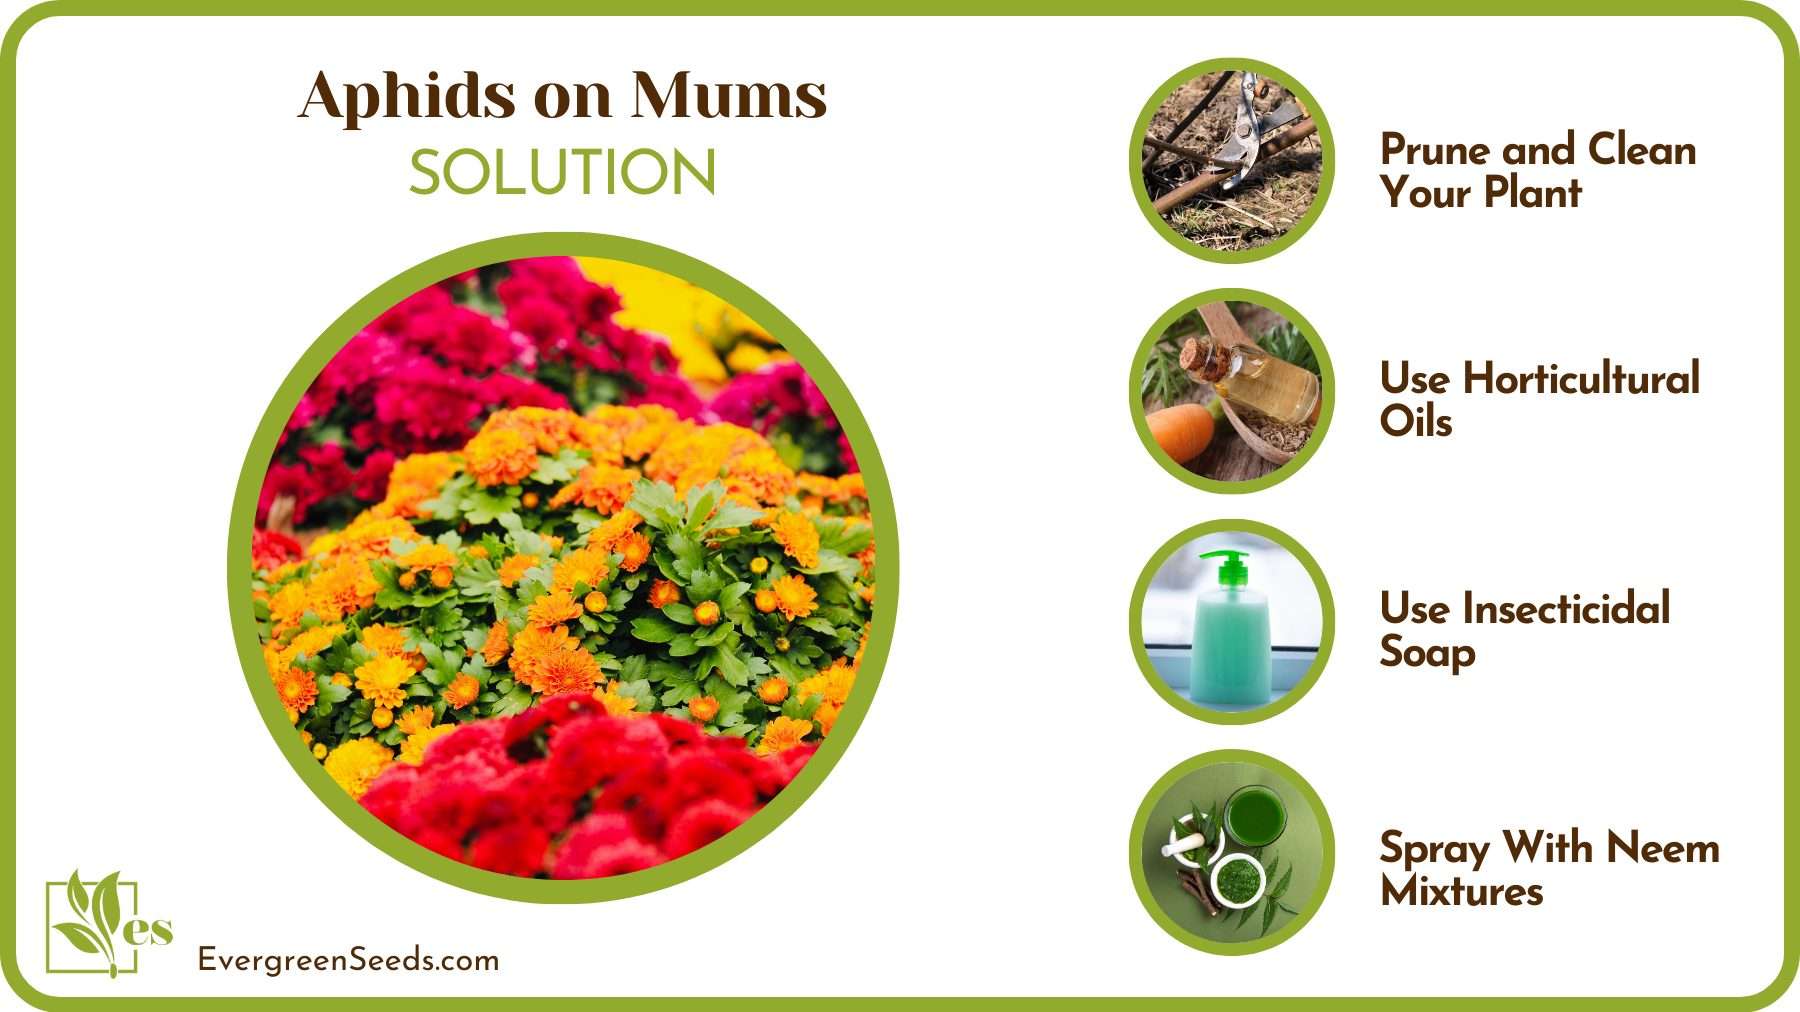 Get Rid of Aphids From Mums